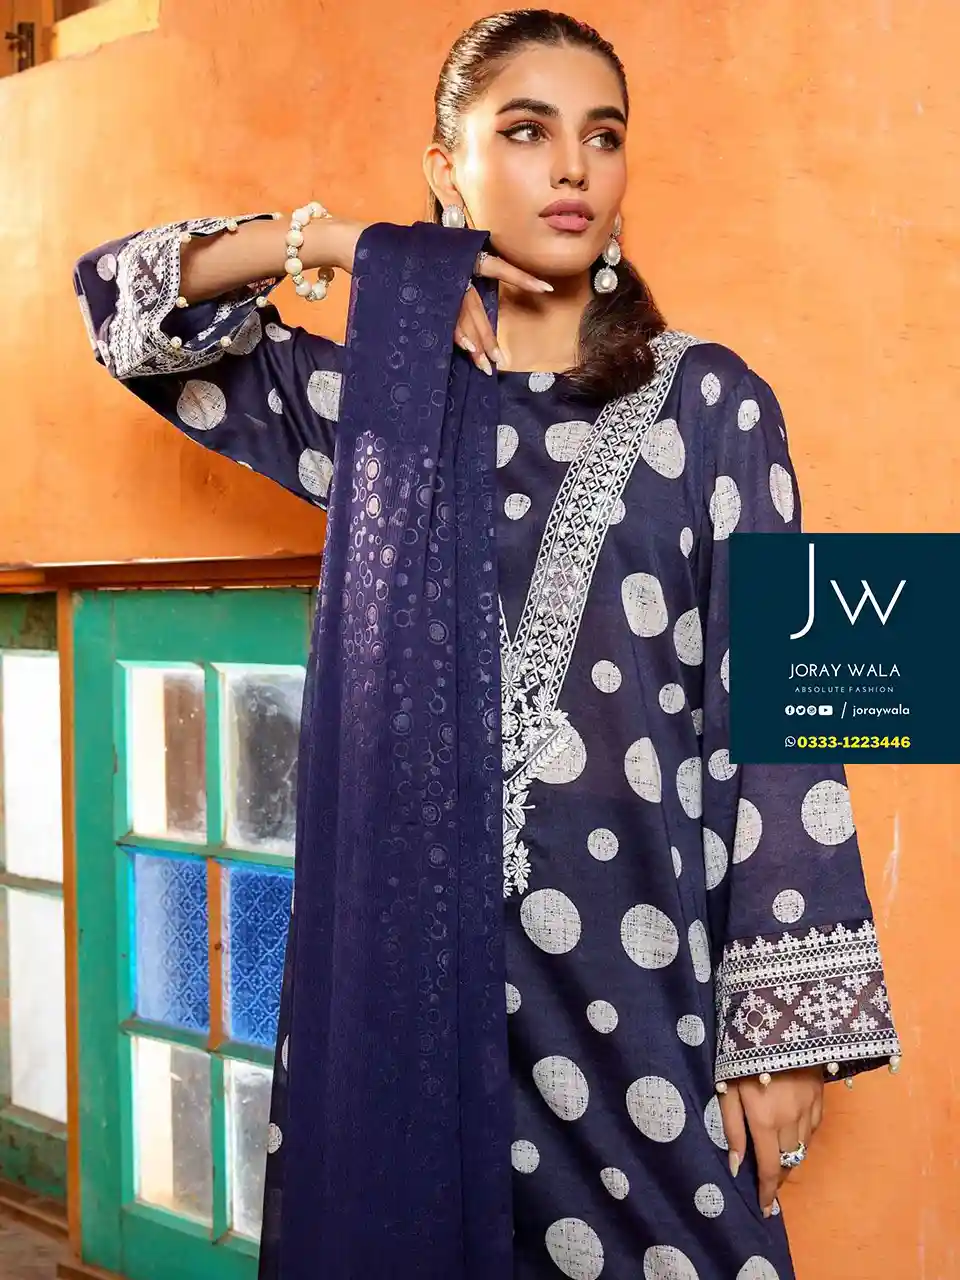 Pakistani model wearing a blue color polka dots 3pcs embroidered suit and the suit is available at joraywala